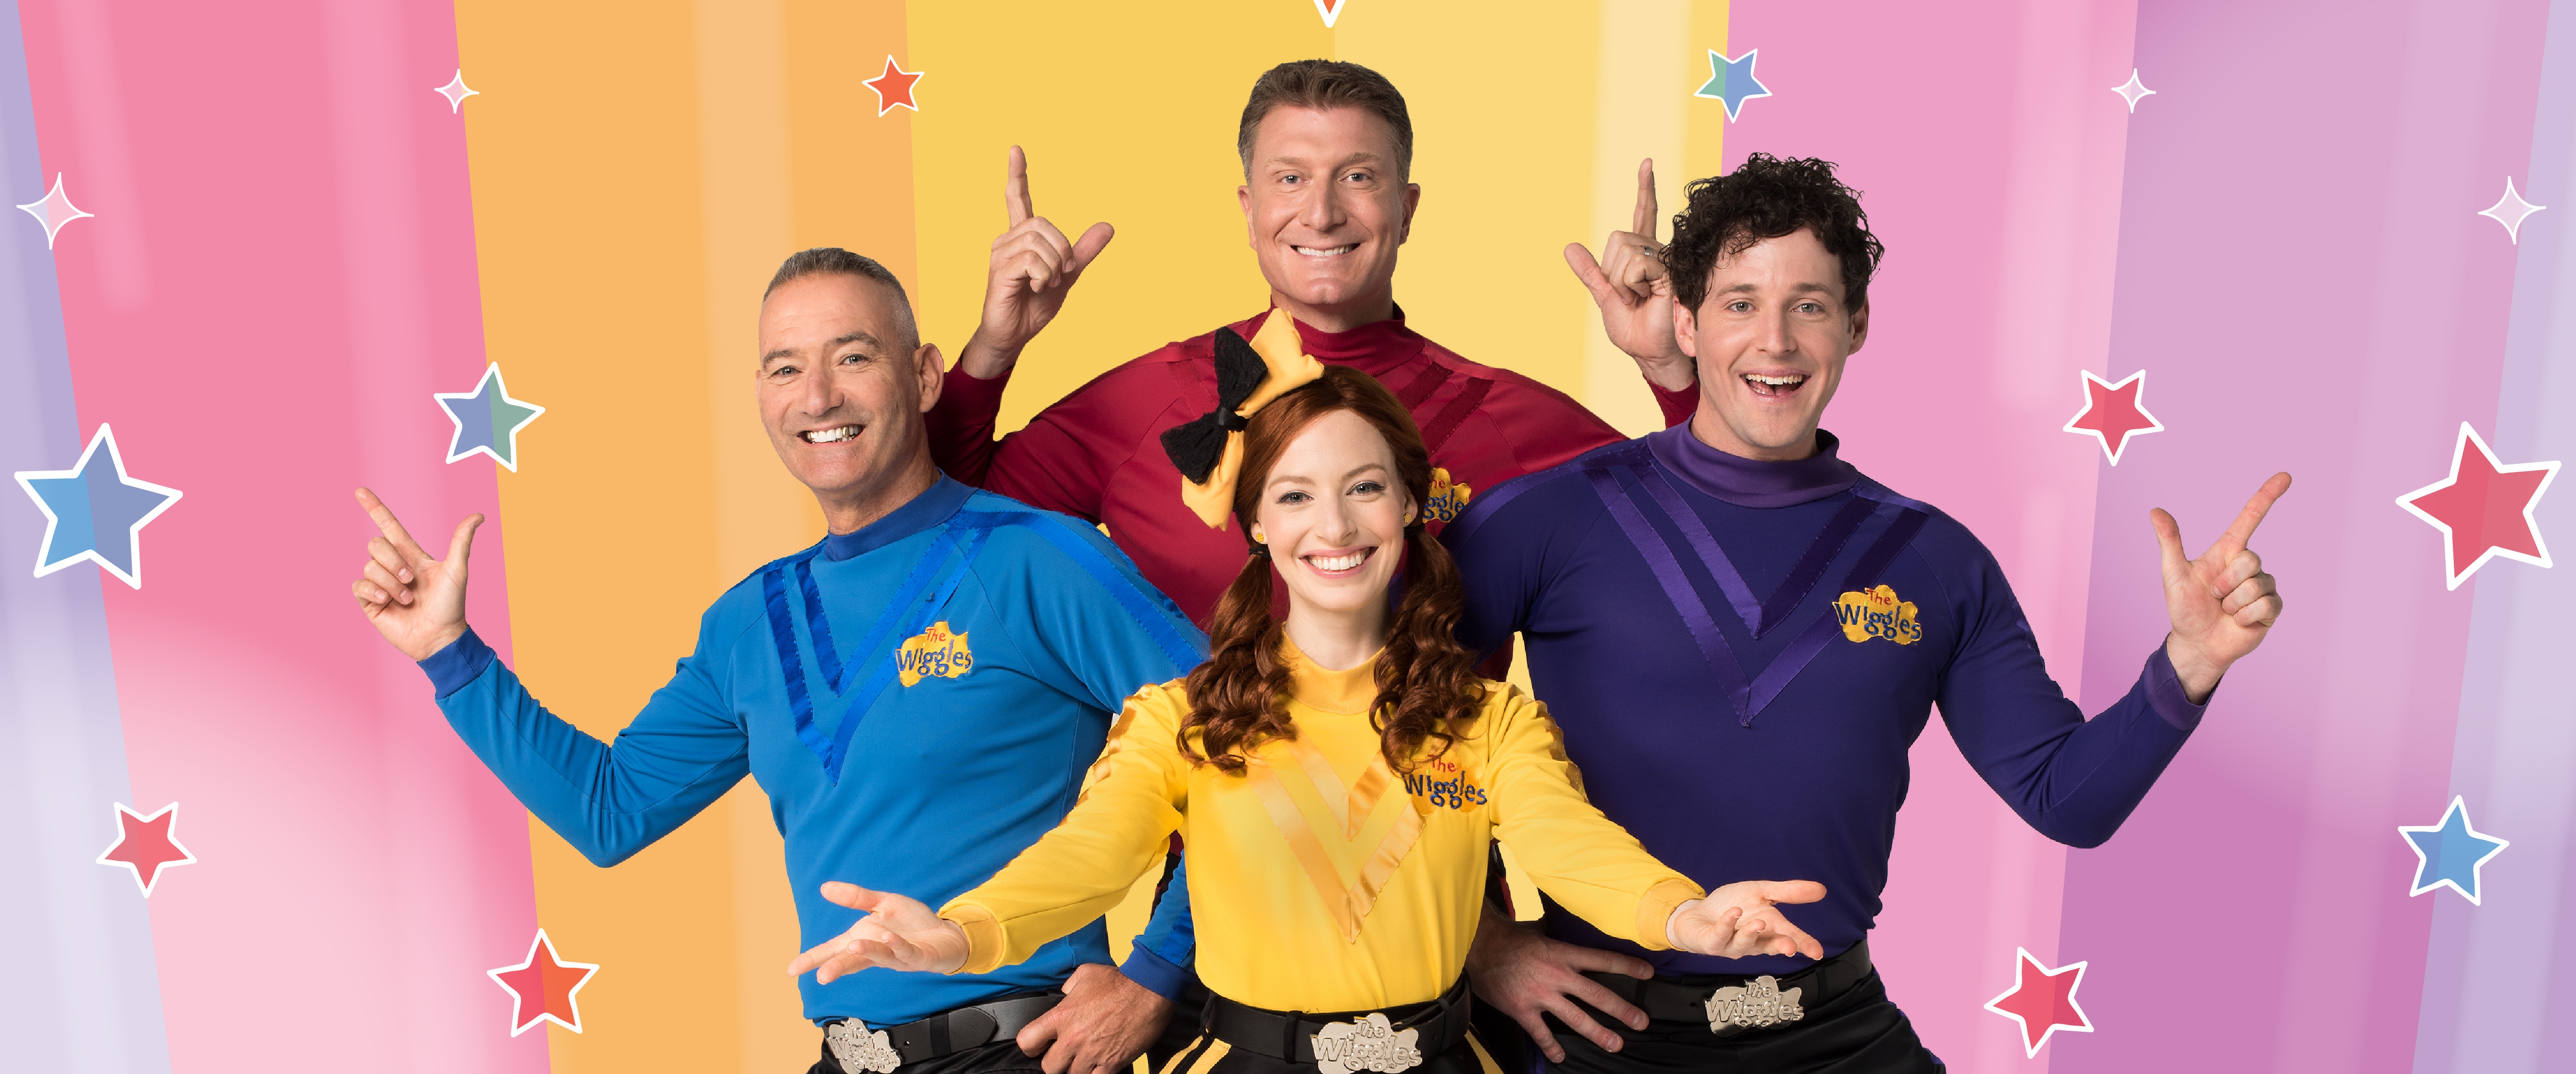 The Wiggles Tour Tickets With Meet And Greet Passes W vrogue.co